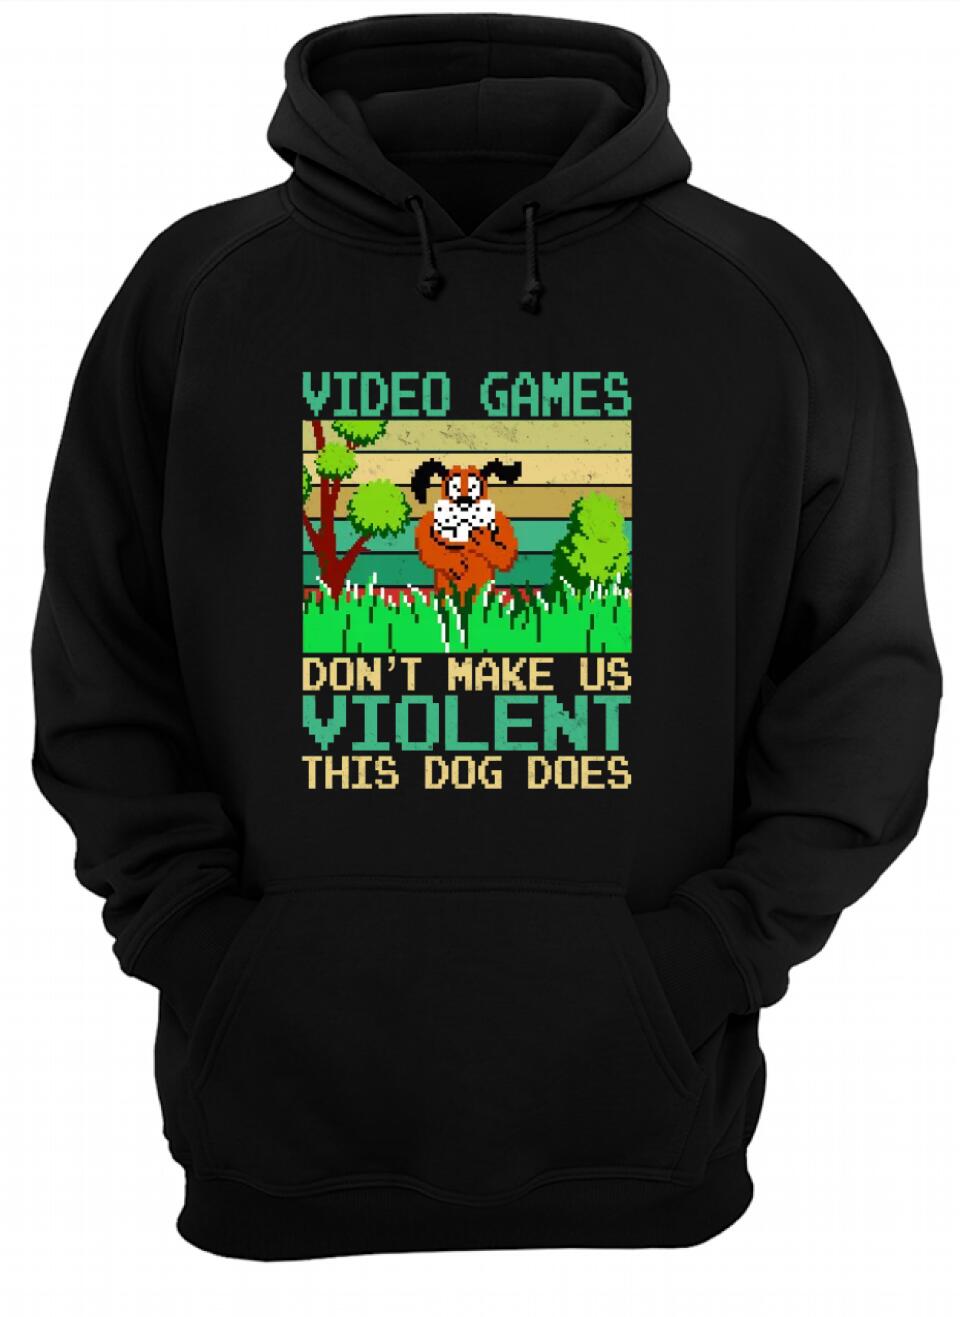 Duck hunt - Limited Edition